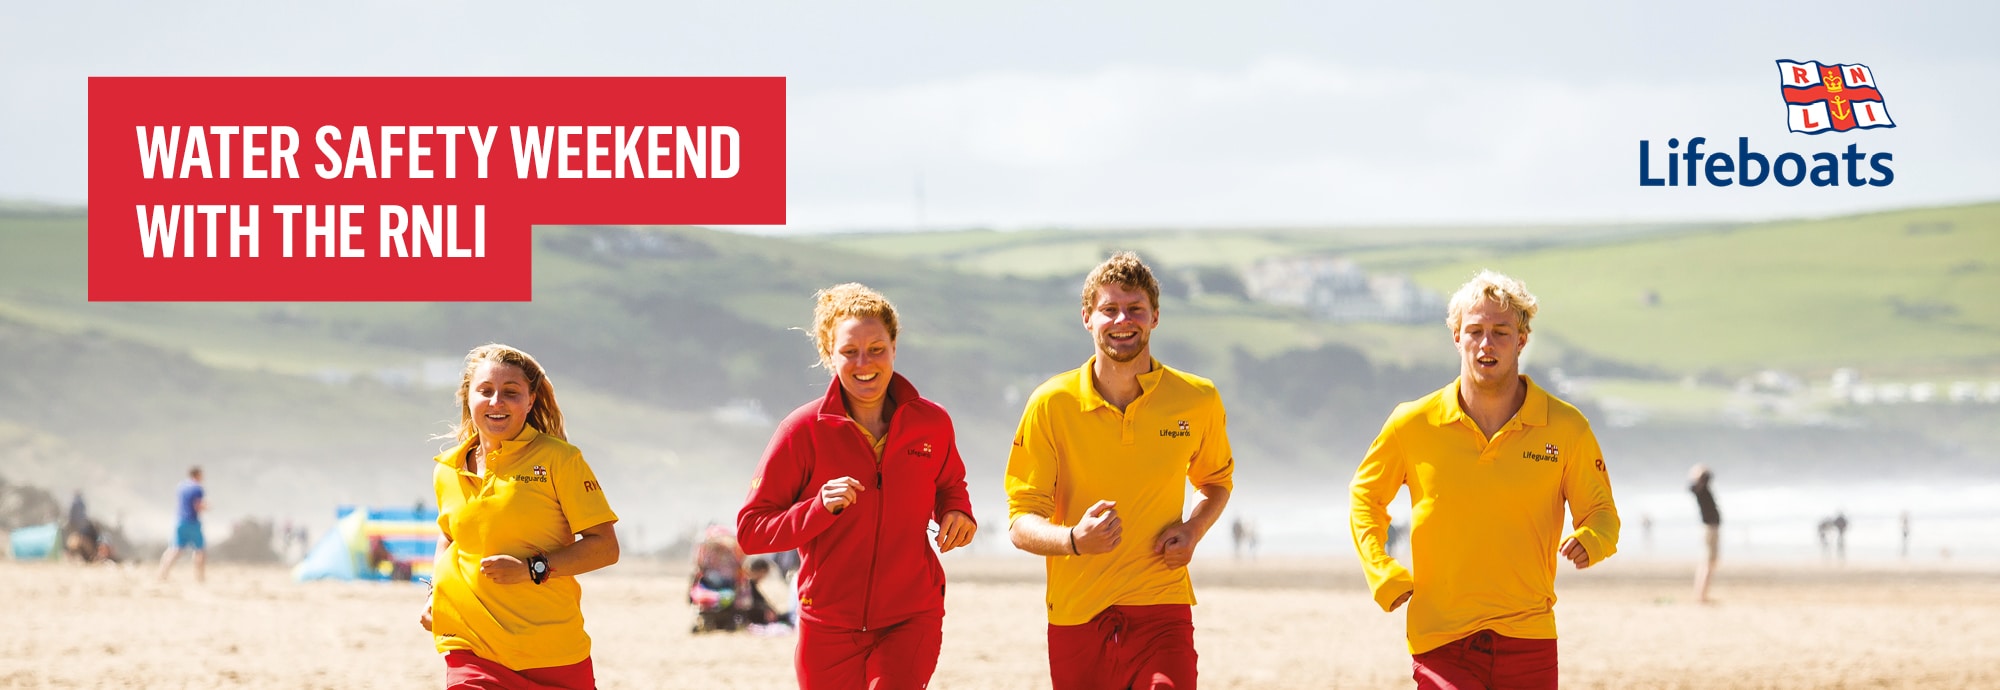 In the top left is a red box with the text 'water safety weekend with the RNLI'. In the top right is the RNLI Lifeboats logo. The main feature of the image is four lifeguards running along a beach.